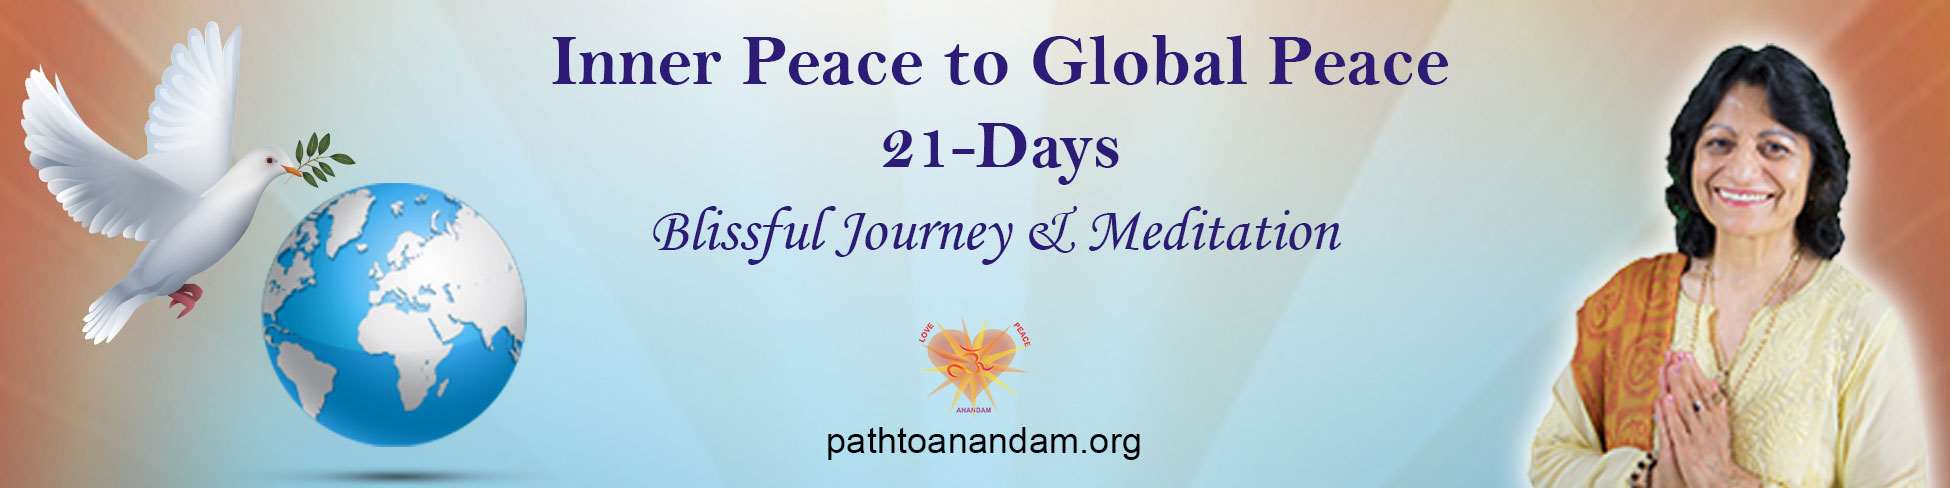 Inner Peace to Global Peace